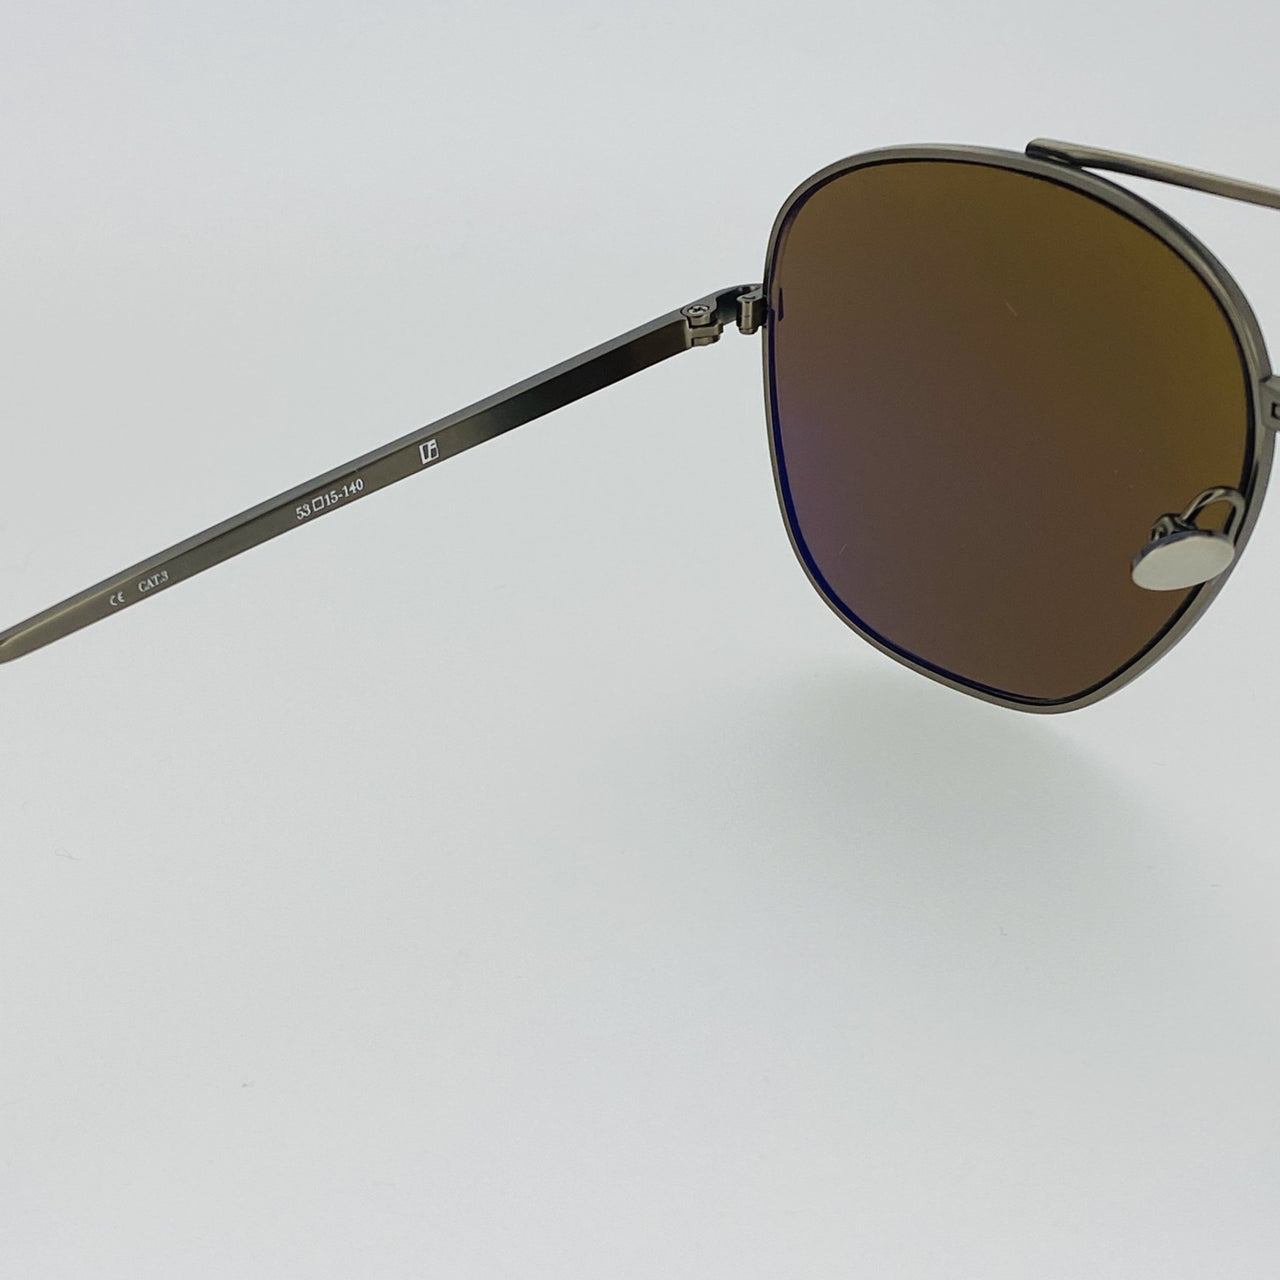 Ann Demeulemeester Sunglasses Brushed Antique Silver & White Gold tone Titanium Frame Brown Lenses Category 3- Dark Tint AD12C3SUN - Watches & Crystals